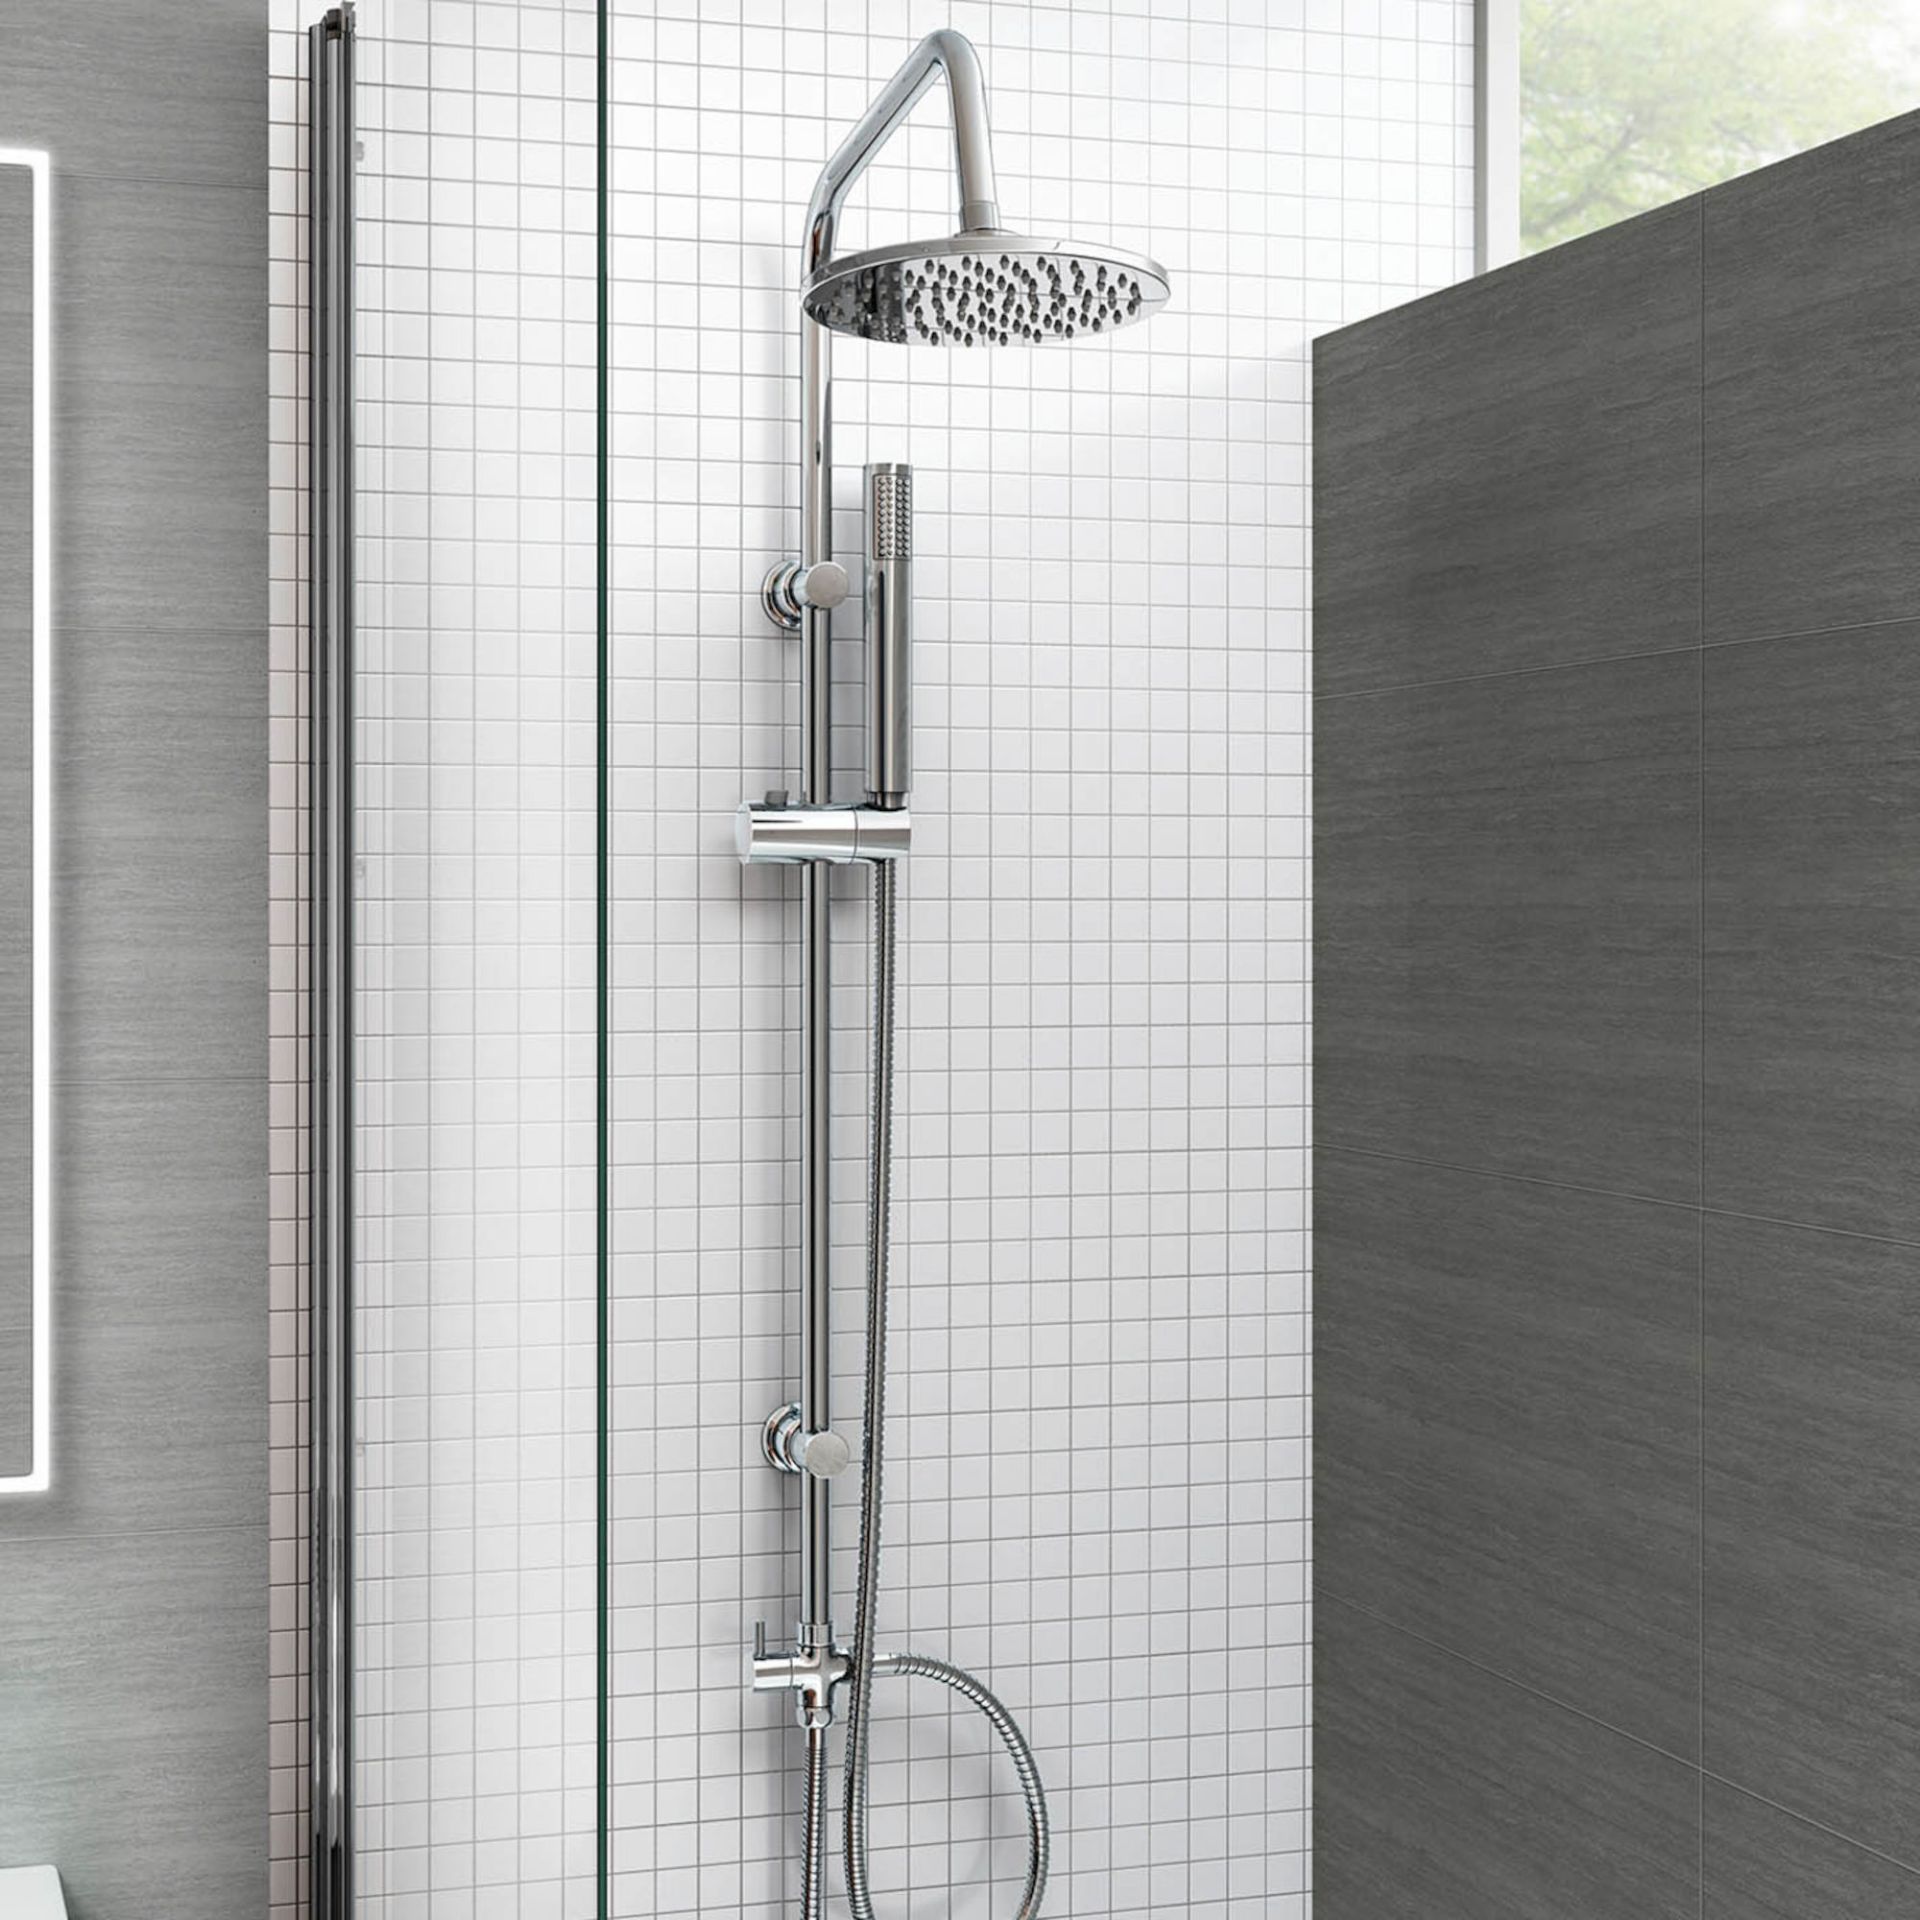 (LU104) 200mm Round Head, Riser Rail & Handheld Kit. Quality stainless steel shower head with Easy